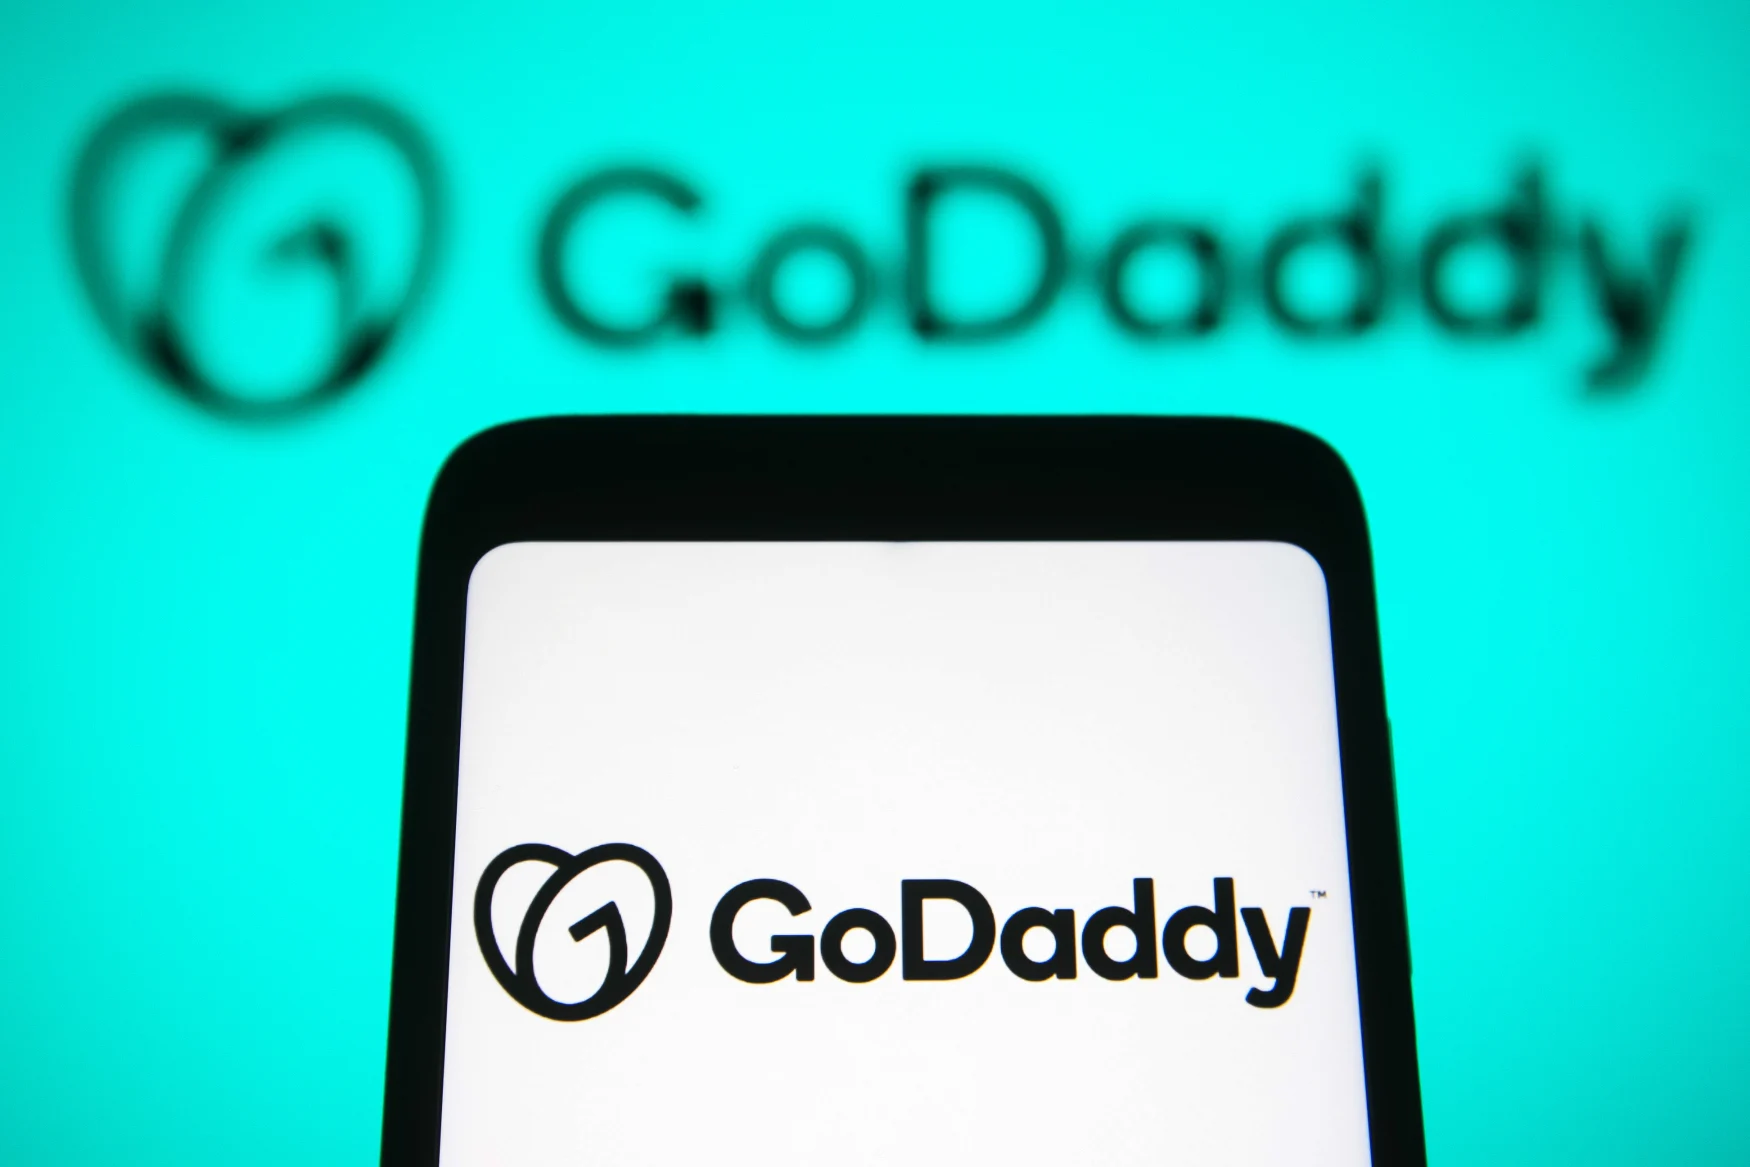 UKRAINE - 2021/11/22: In this photo illustration, the GoDaddy Inc. logo is seen on a smartphone and on the background. (Photo Illustration by Pavlo Gonchar/SOPA Images/LightRocket via Getty Images)